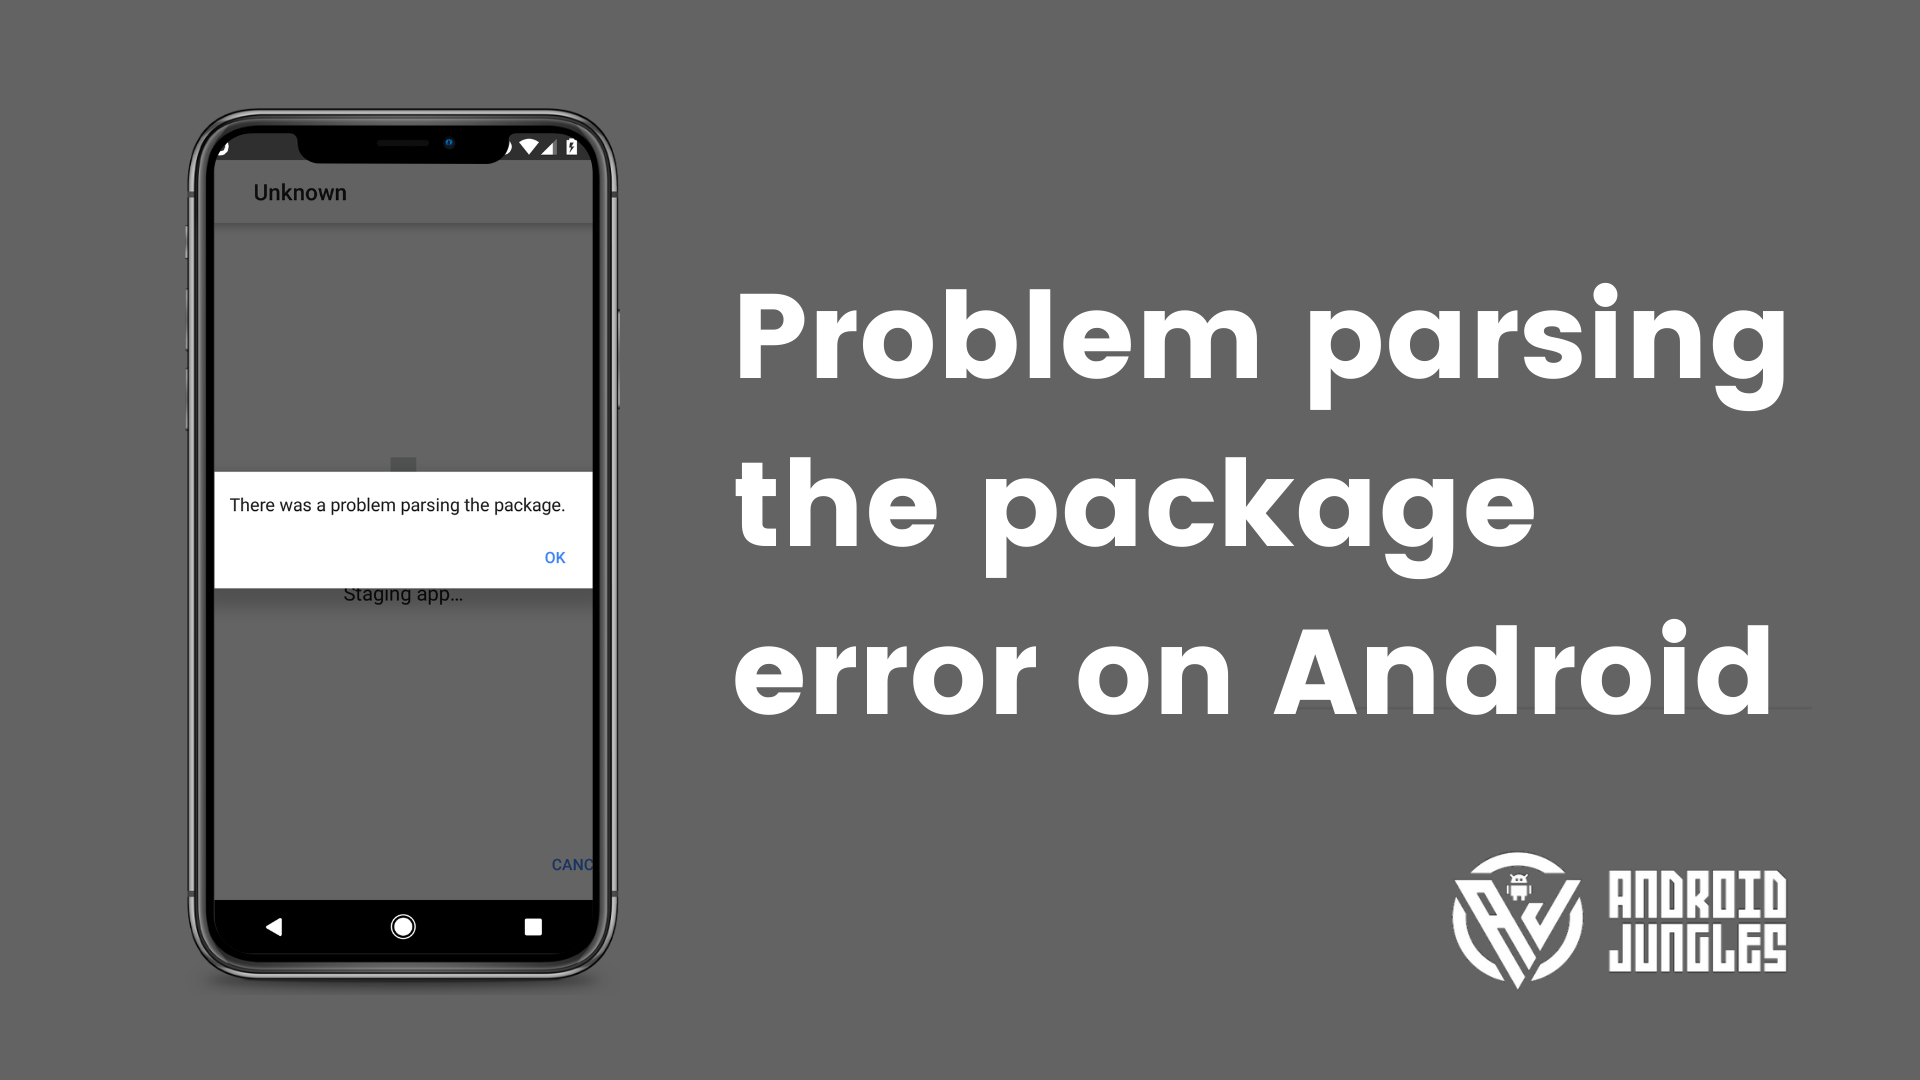 How to fix Problem parsing the package error on Android?